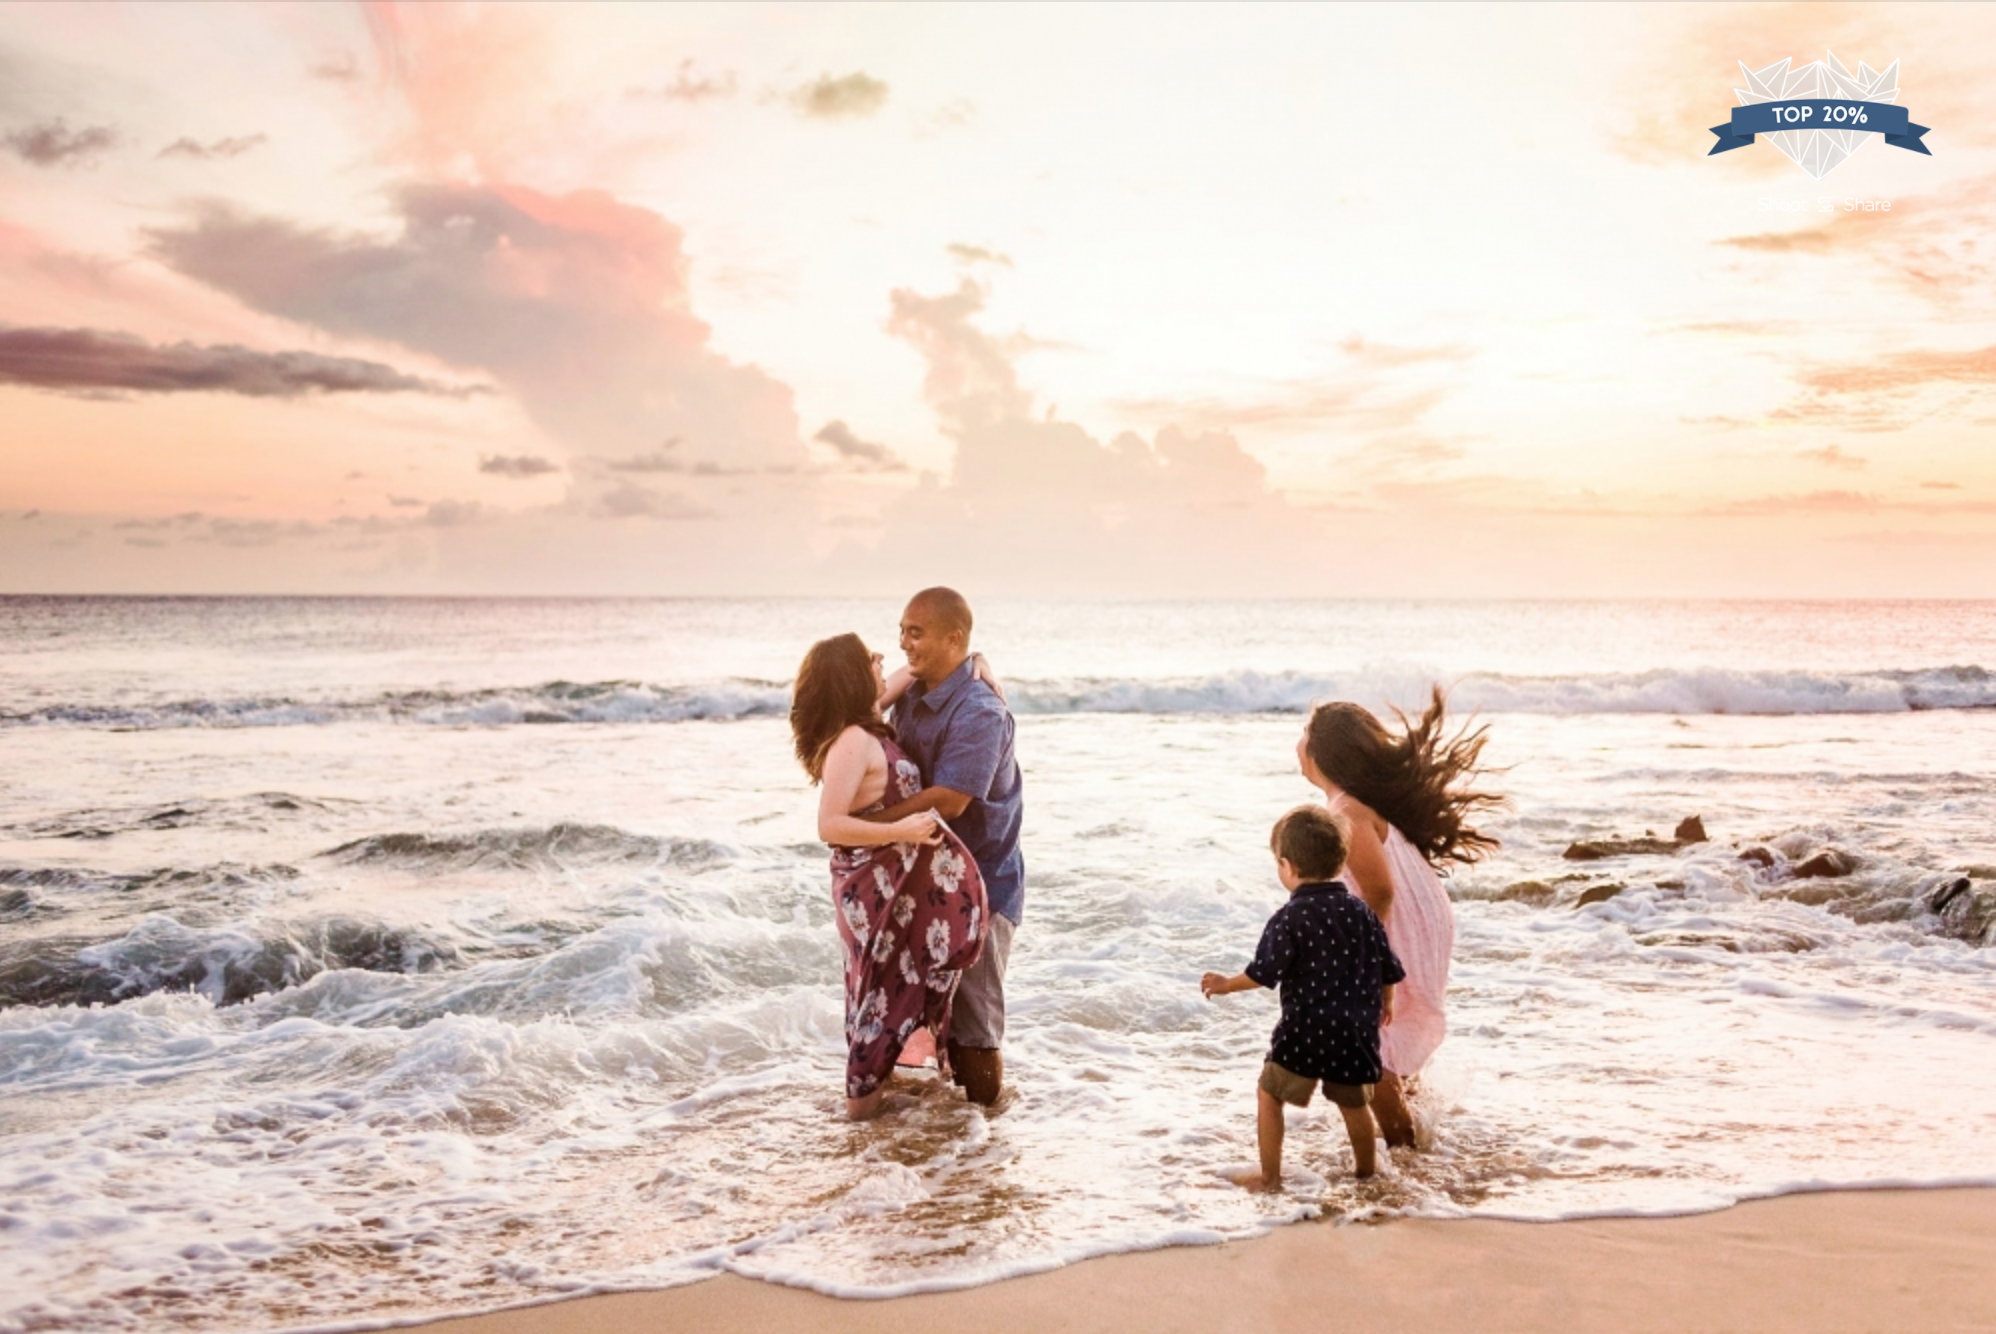 Shoot-Share-Contest-2018-Hawaii-Oahu-Top-20-Maternity-photographer.png